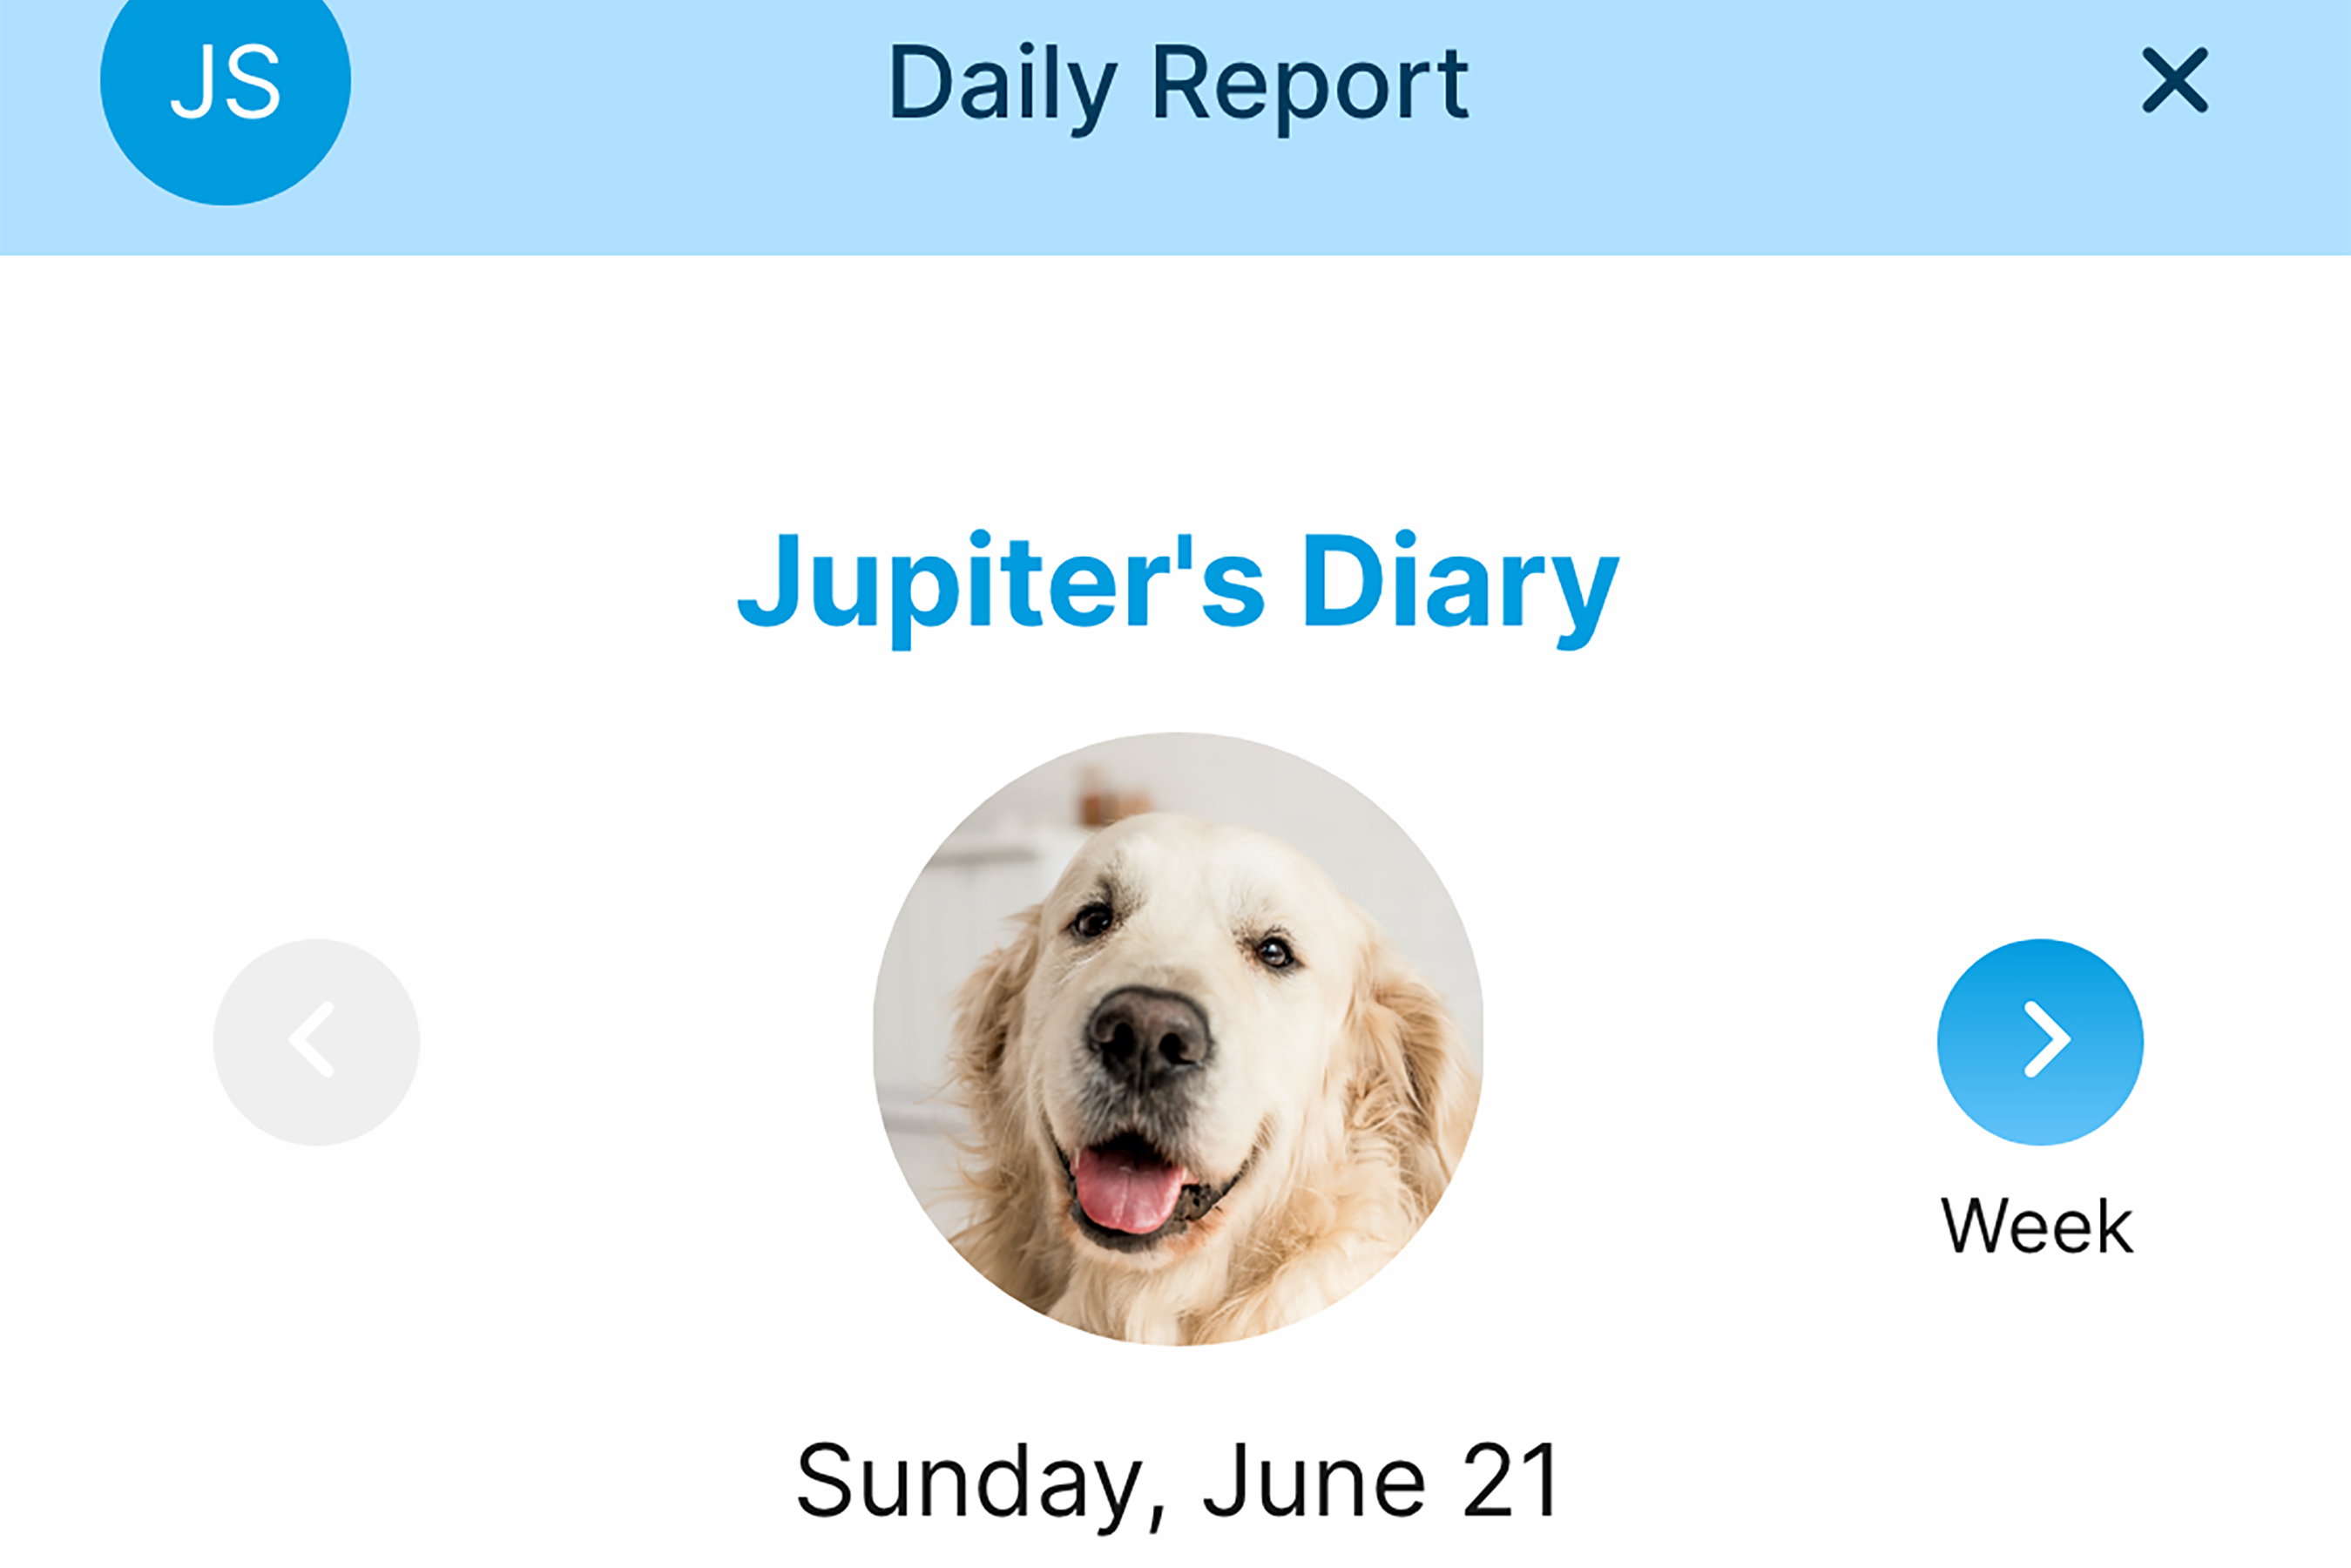 Daily reports screen of app